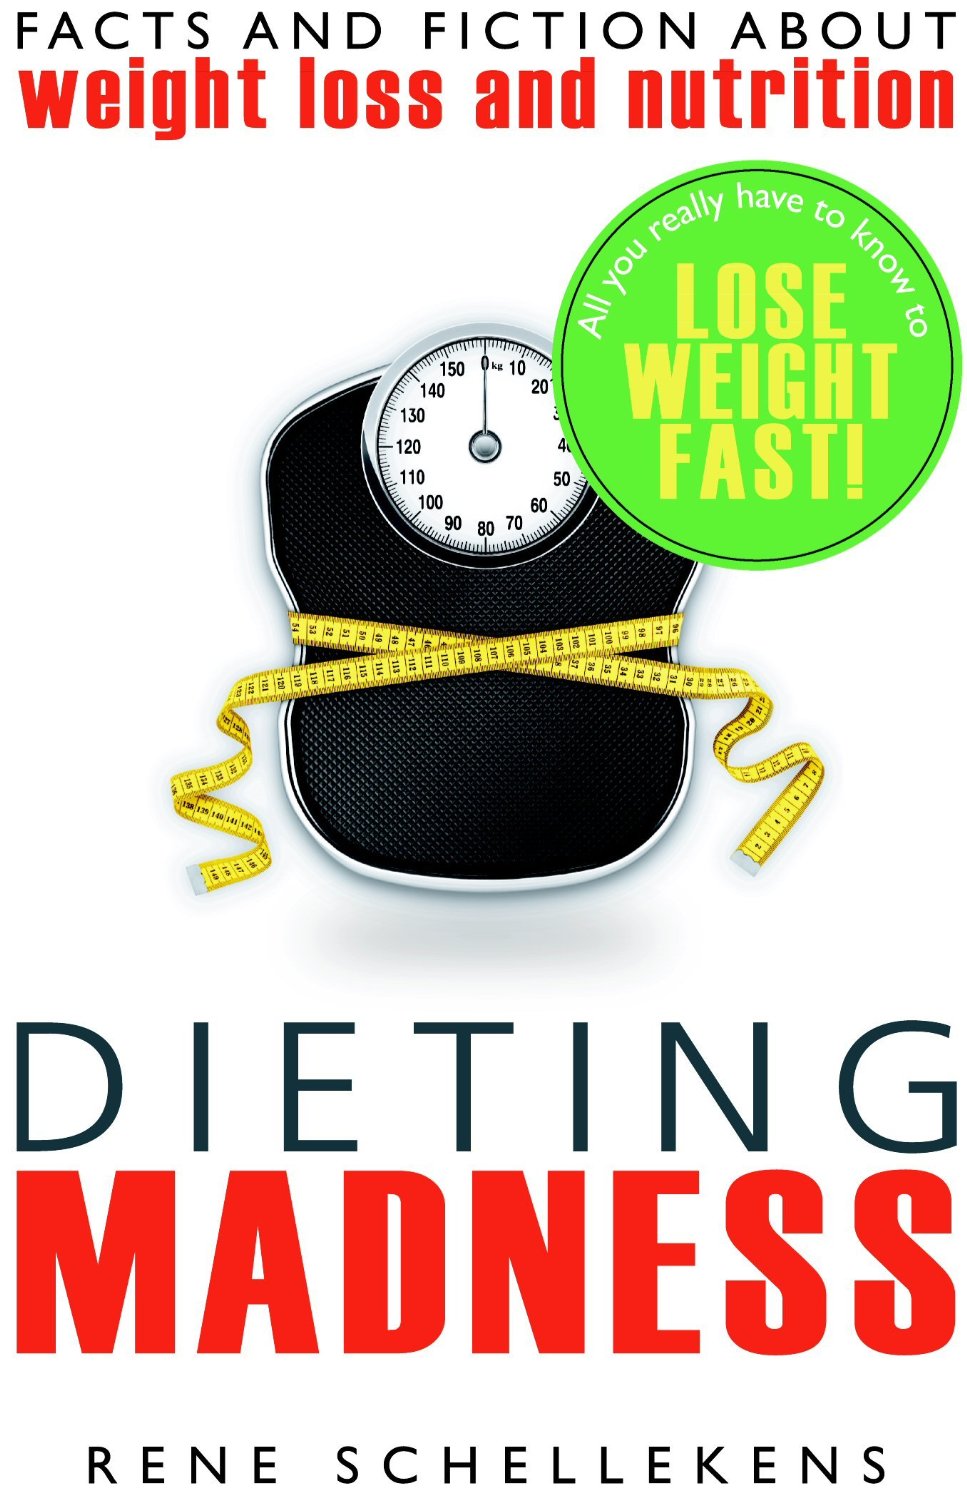 Dieting Madness: Facts and Fiction about Weight Loss and Nutrition by Rene Schellekens